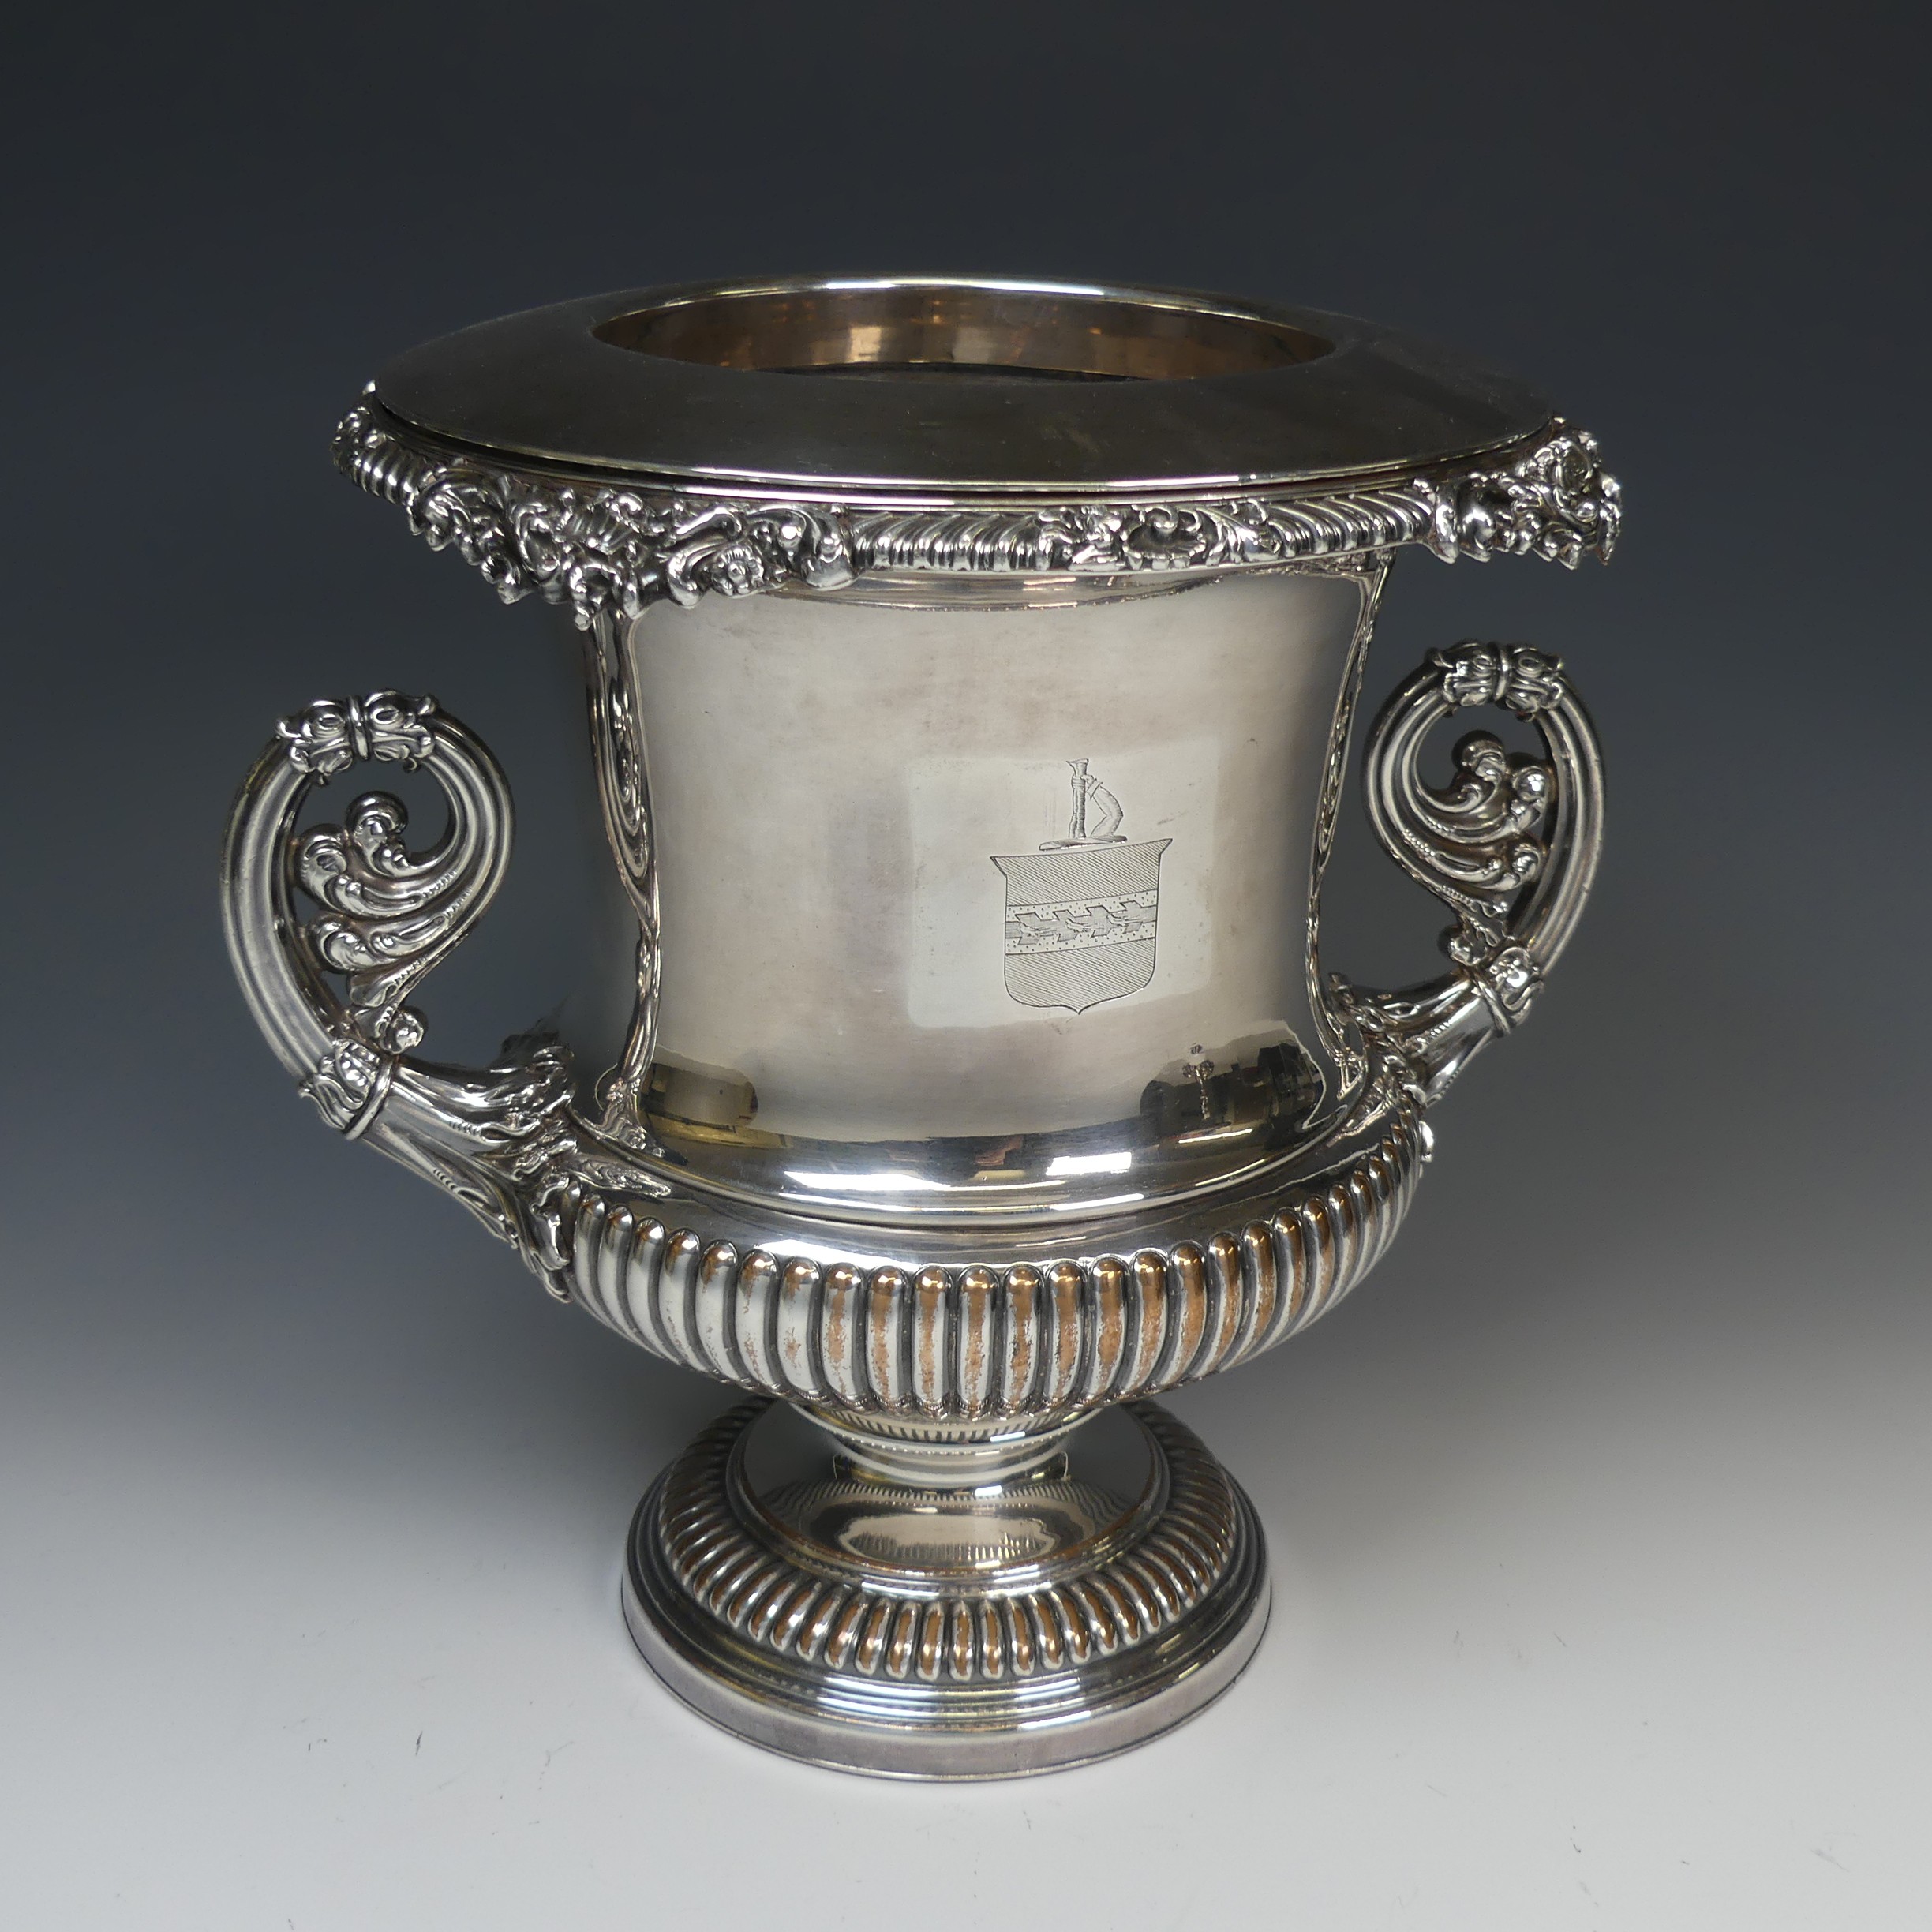 A silver plated Champagne Cooler, in the form of a campana urn, engraved with the Tolcher (Plymouth)